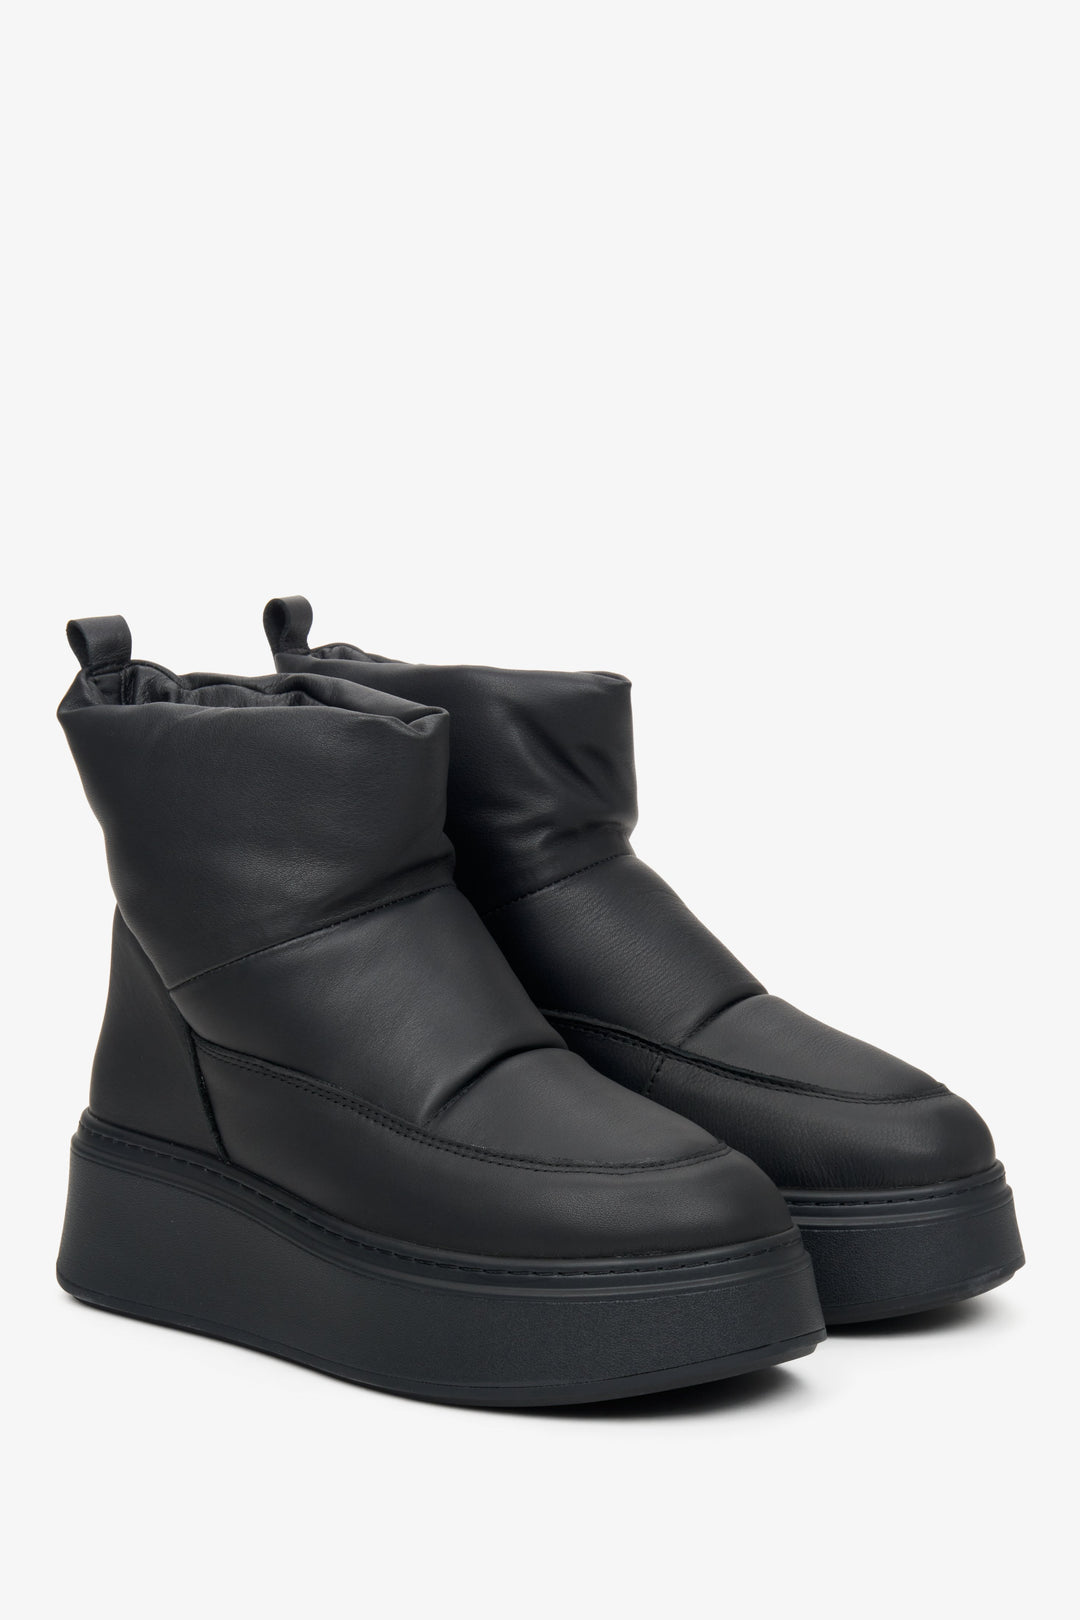 Women's black leather snow boots made of genuine leather.